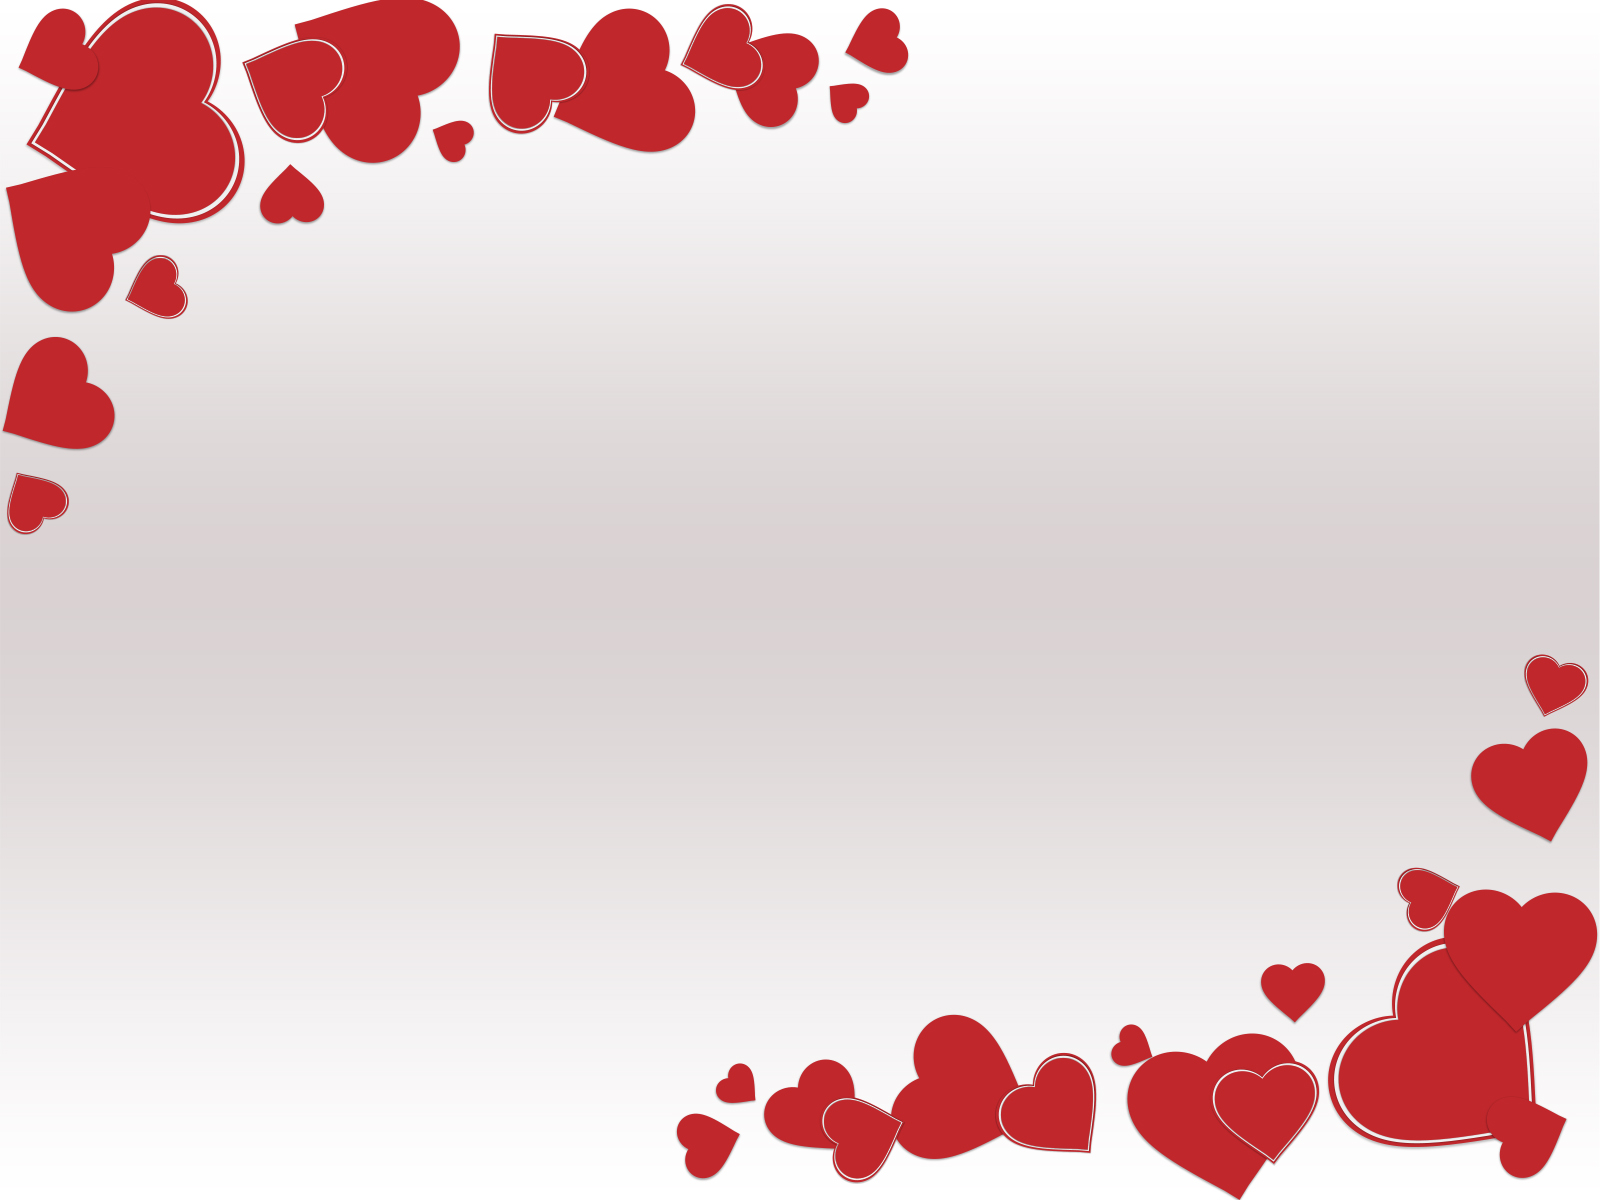 Grunge Valentine Day Backgrounds   Love Red White   PPT